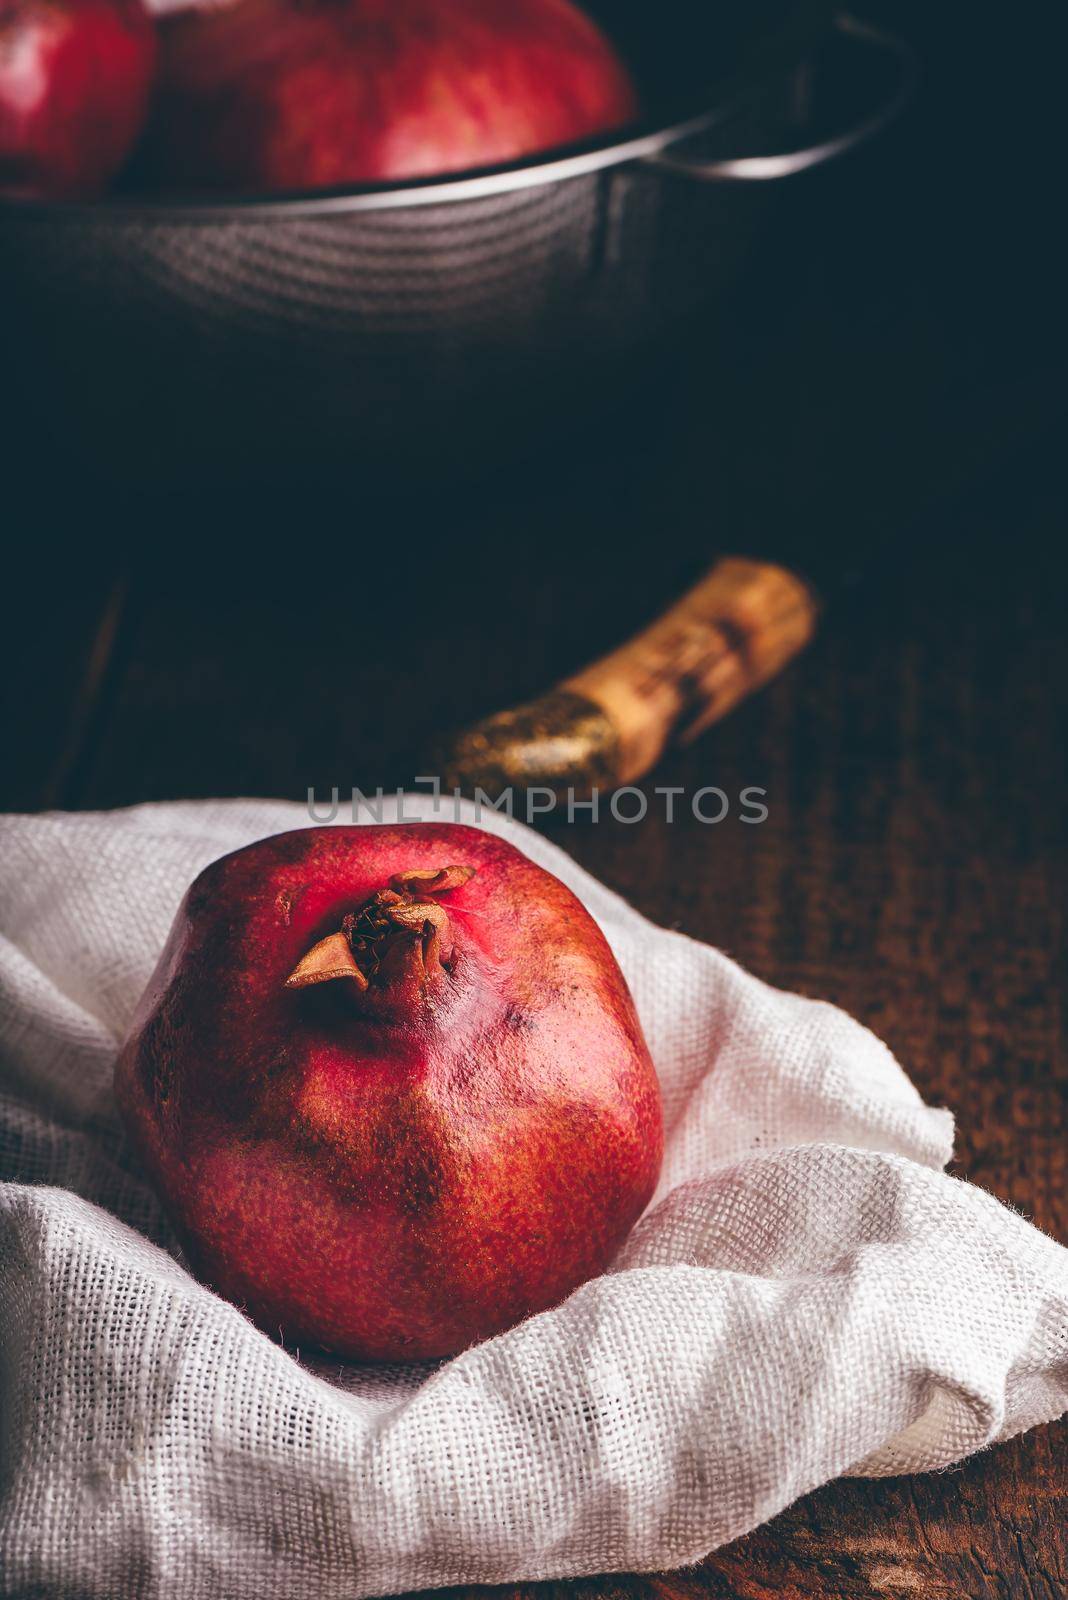 Red and ripe pomegranate fruits in rustic setting